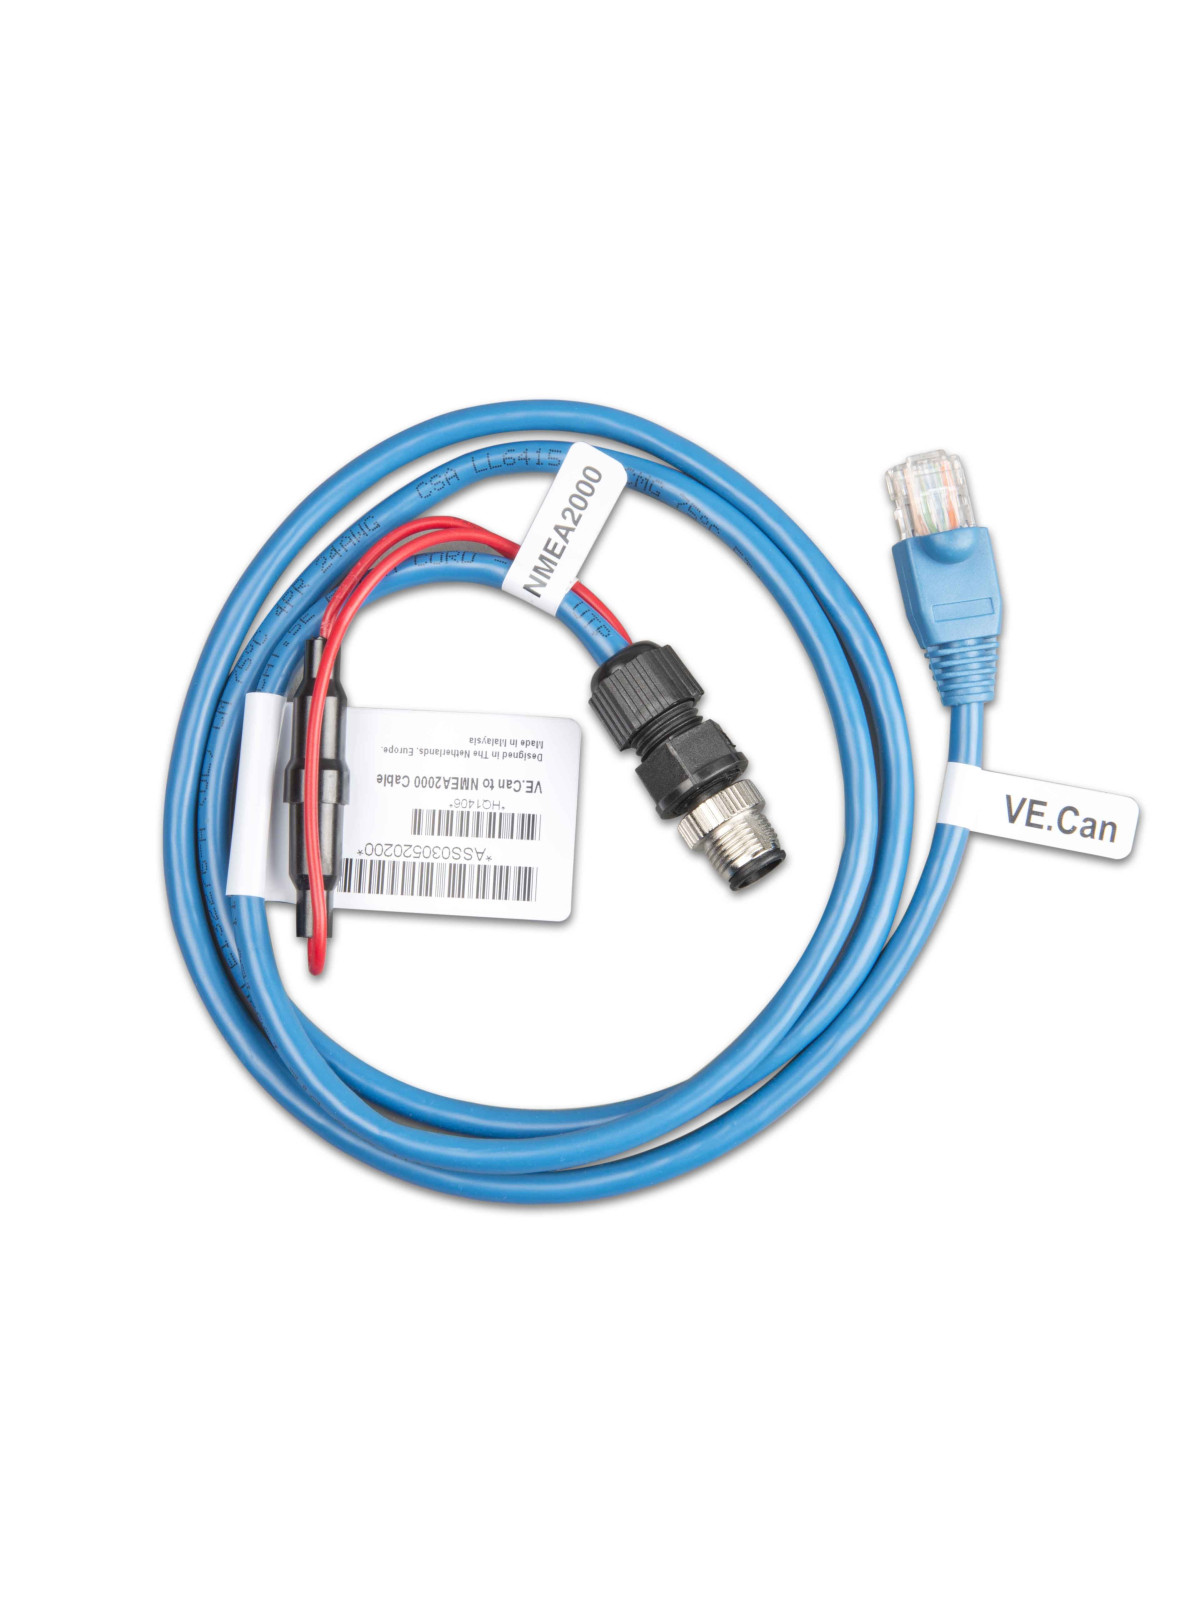 Victron VE.Can Kabel auf NMEA2000 Micro-C-Stecker